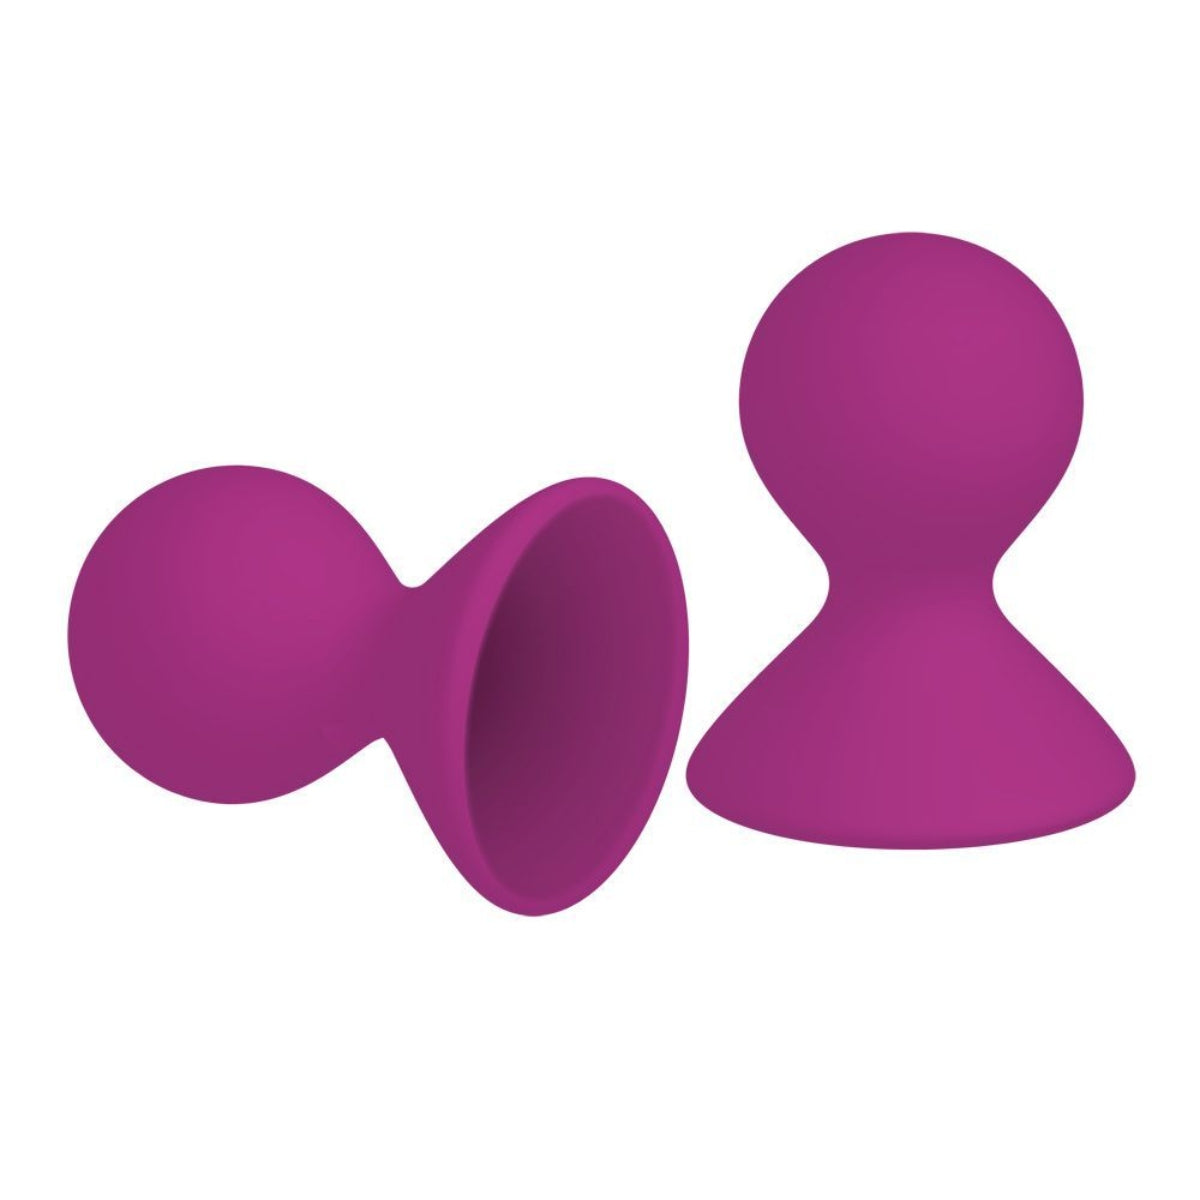 Me You Us Dual Masseuse Nipple Suckers 2 Pack Silicone Pink - Simply Pleasure